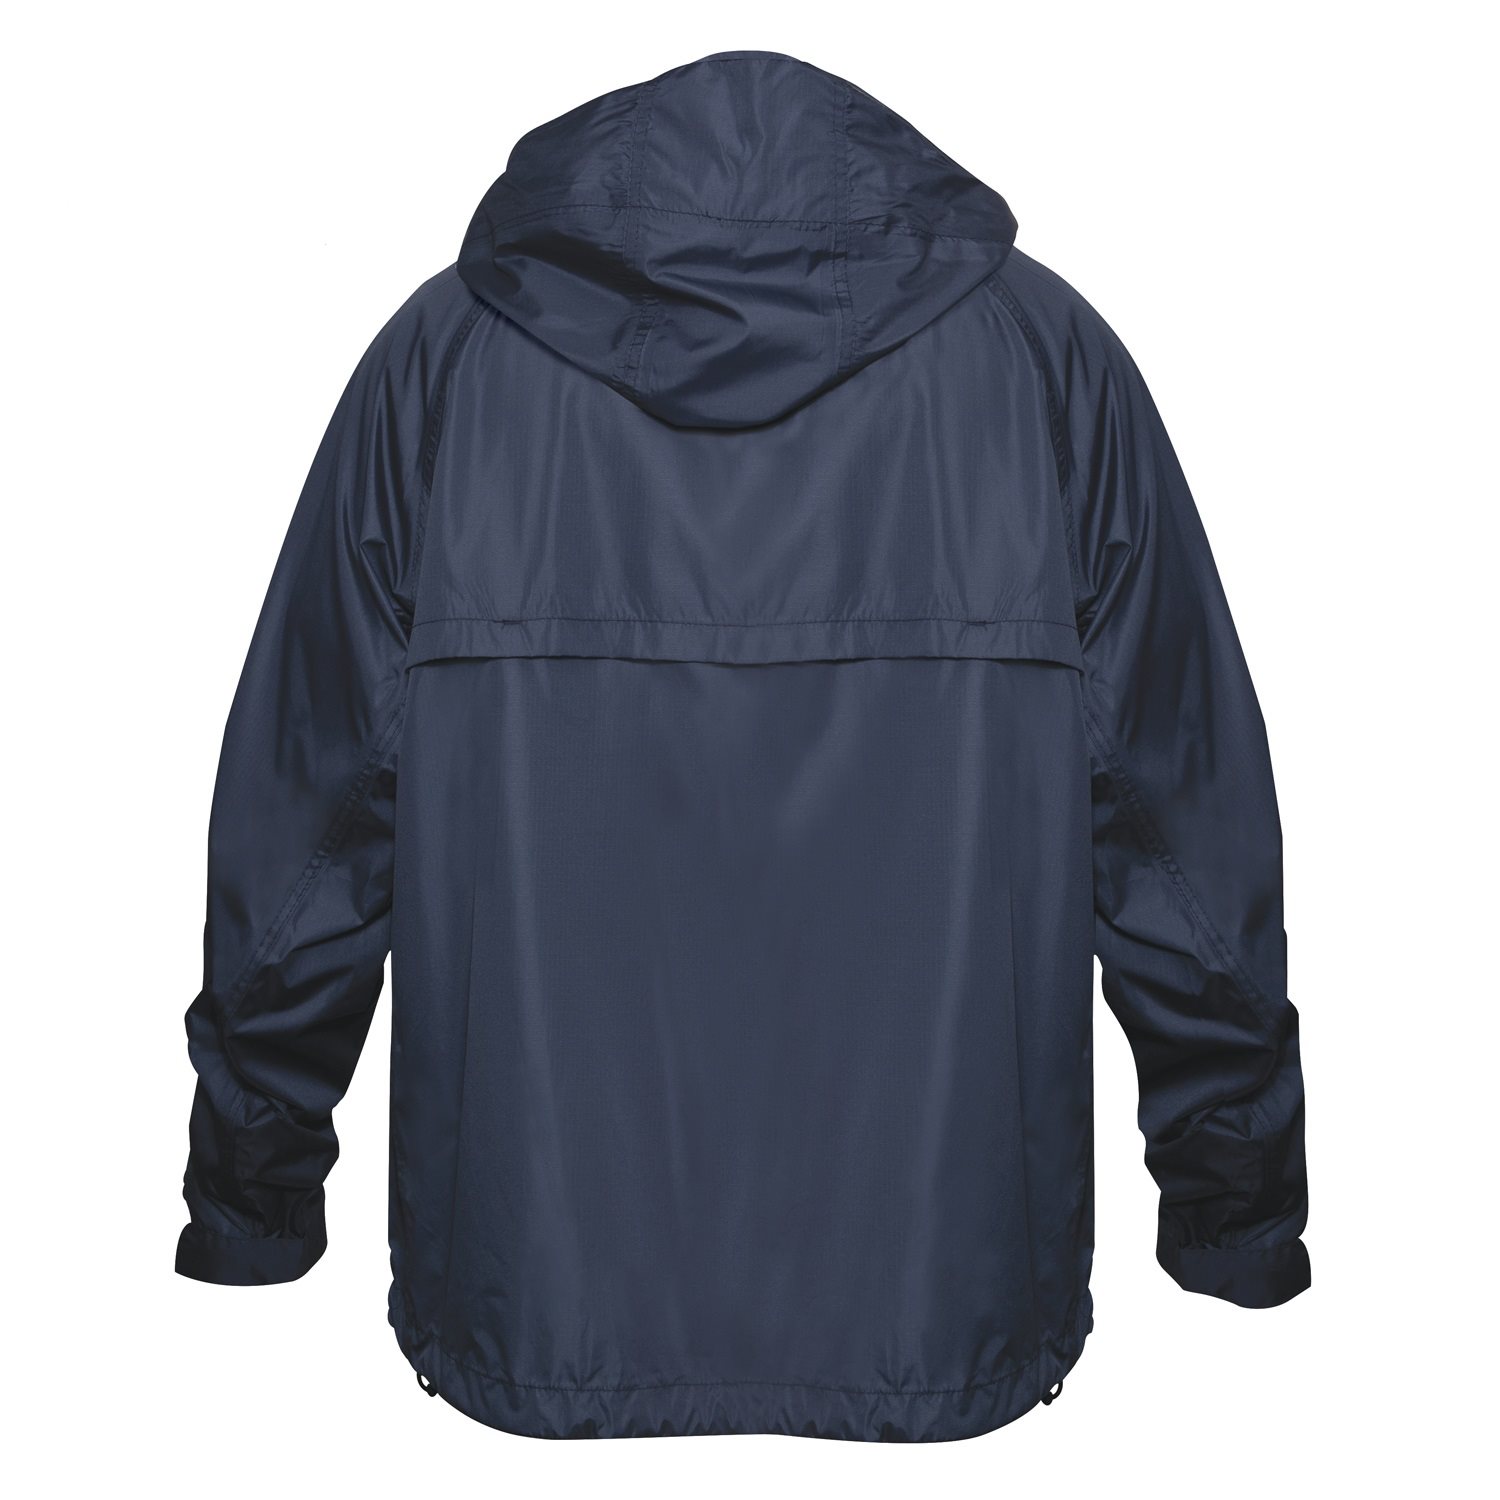 Lightweight waterproof jacket with hood NAVY BLUE ROTHCO 1874 L-11